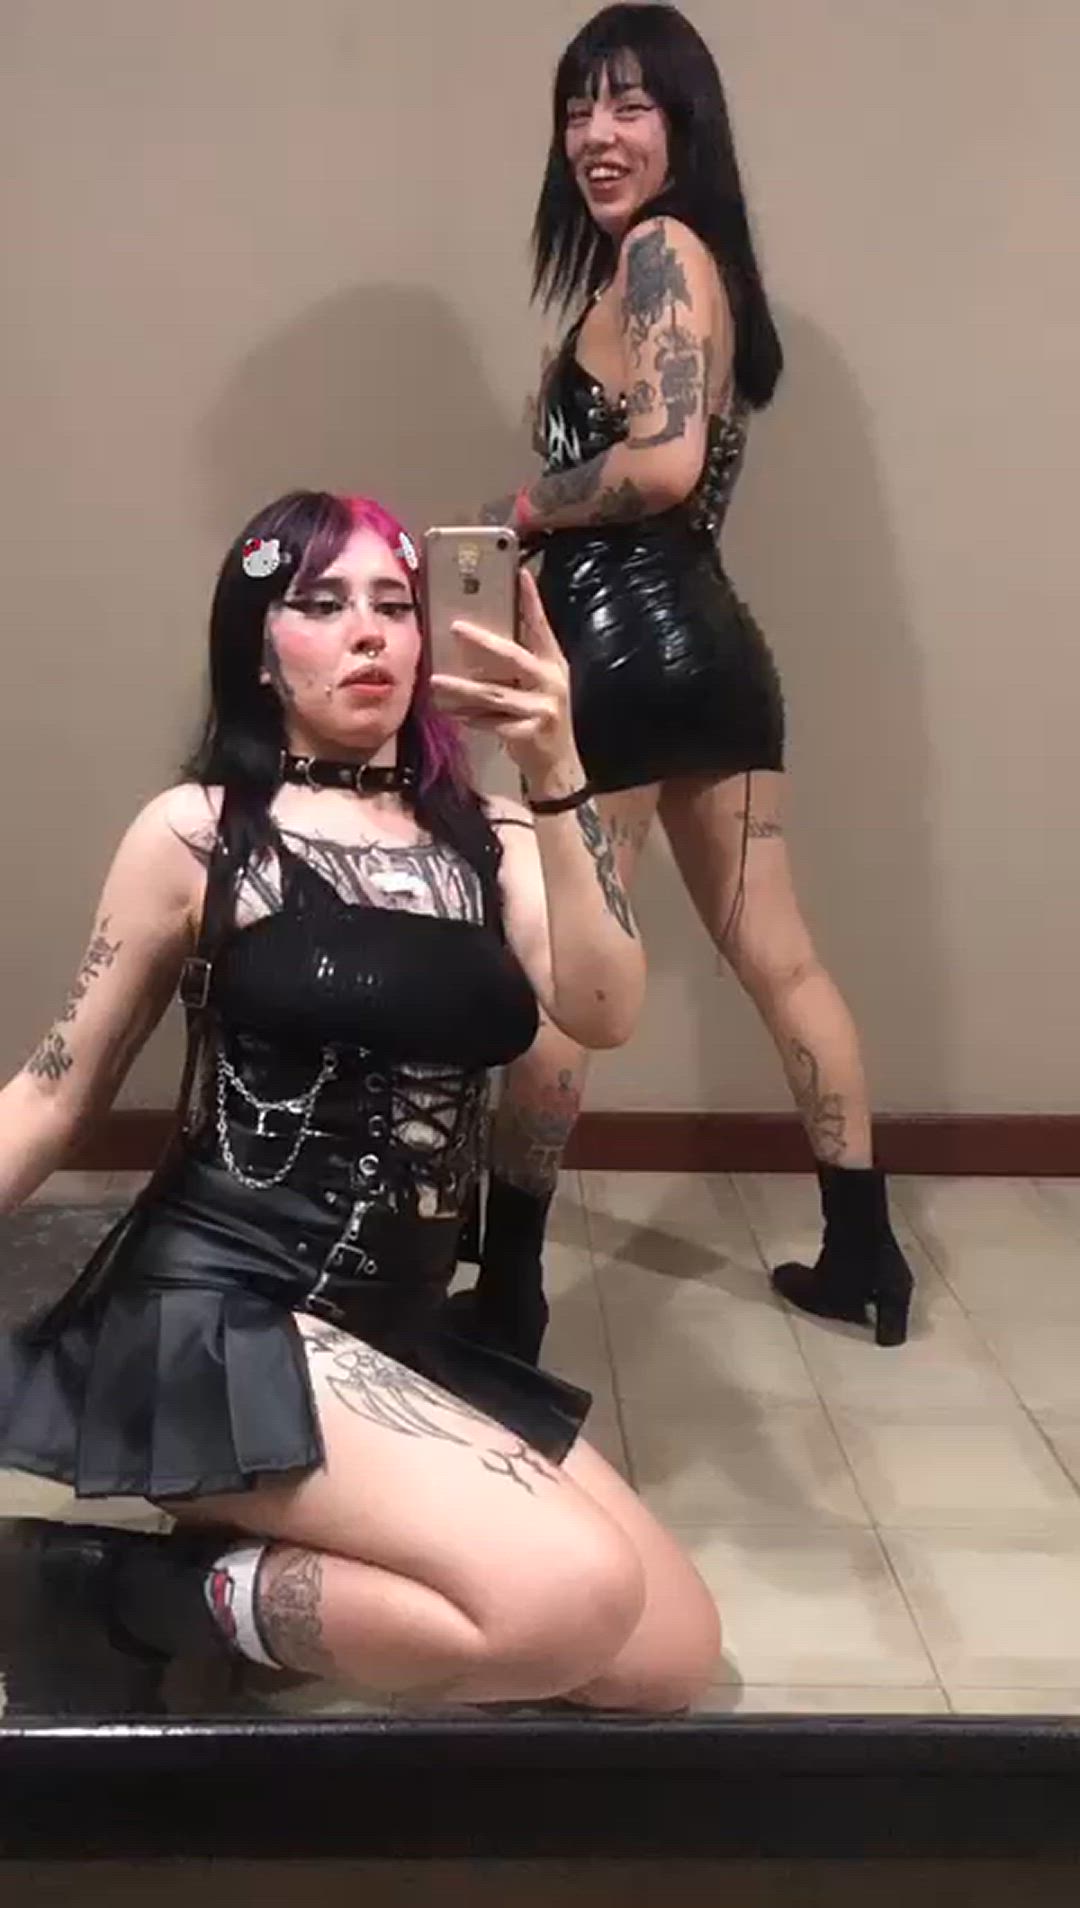 Ass porn video with onlyfans model cyberdallas <strong>@kitty_small.uwu</strong>